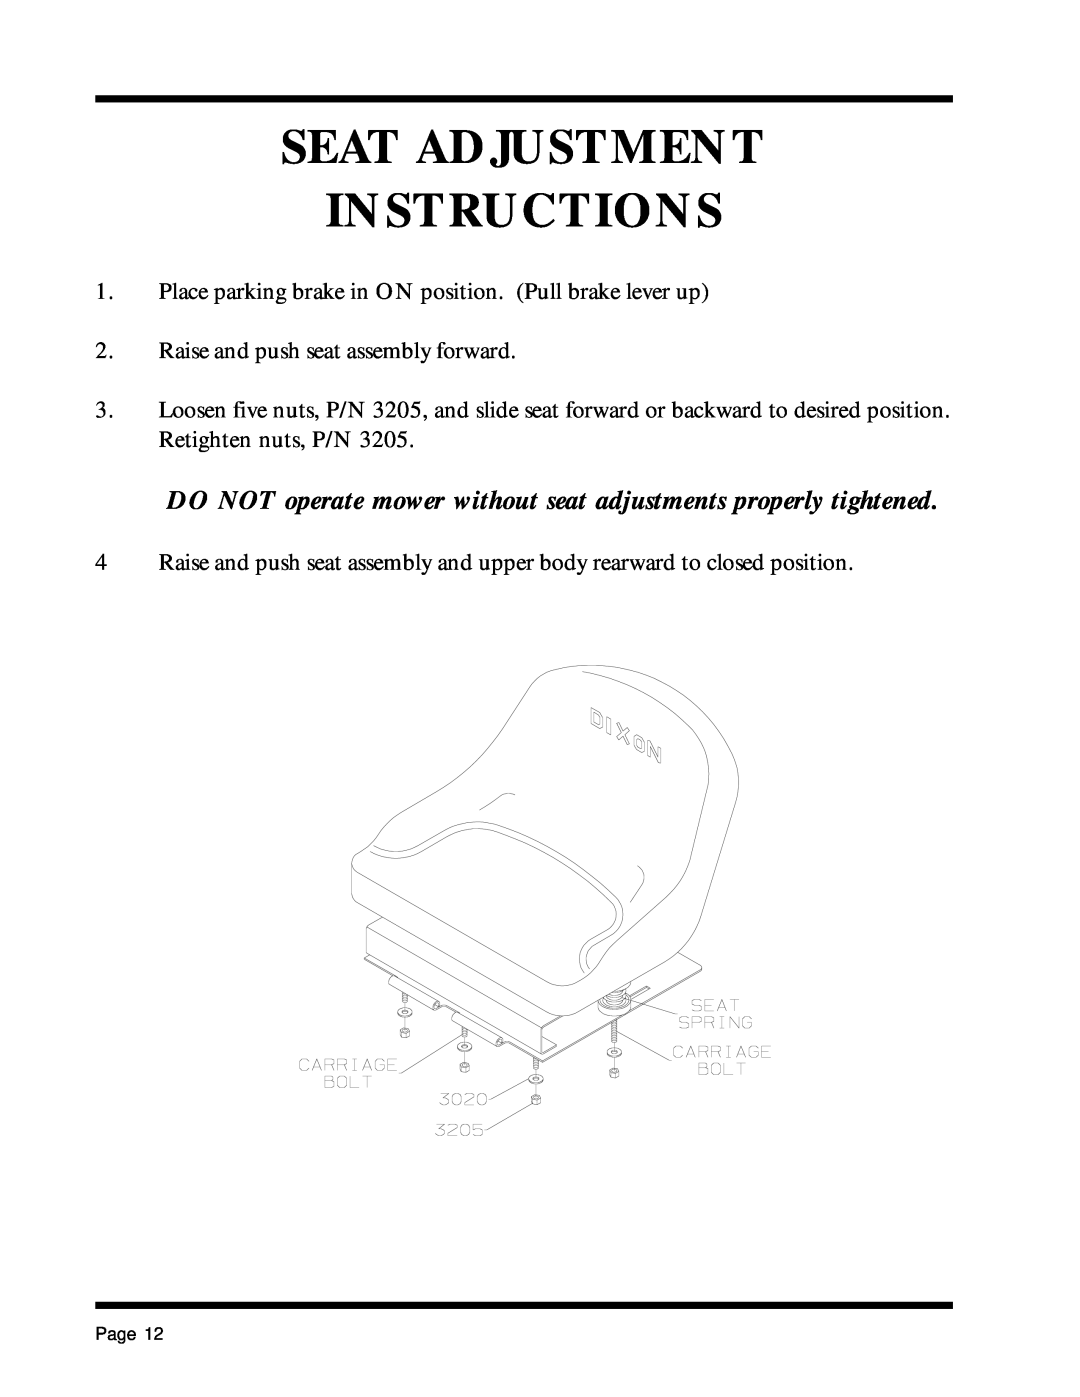 Dixon 13088-1100A Seat Adjustment Instructions, DO NOT operate mower without seat adjustments properly tightened, Page 